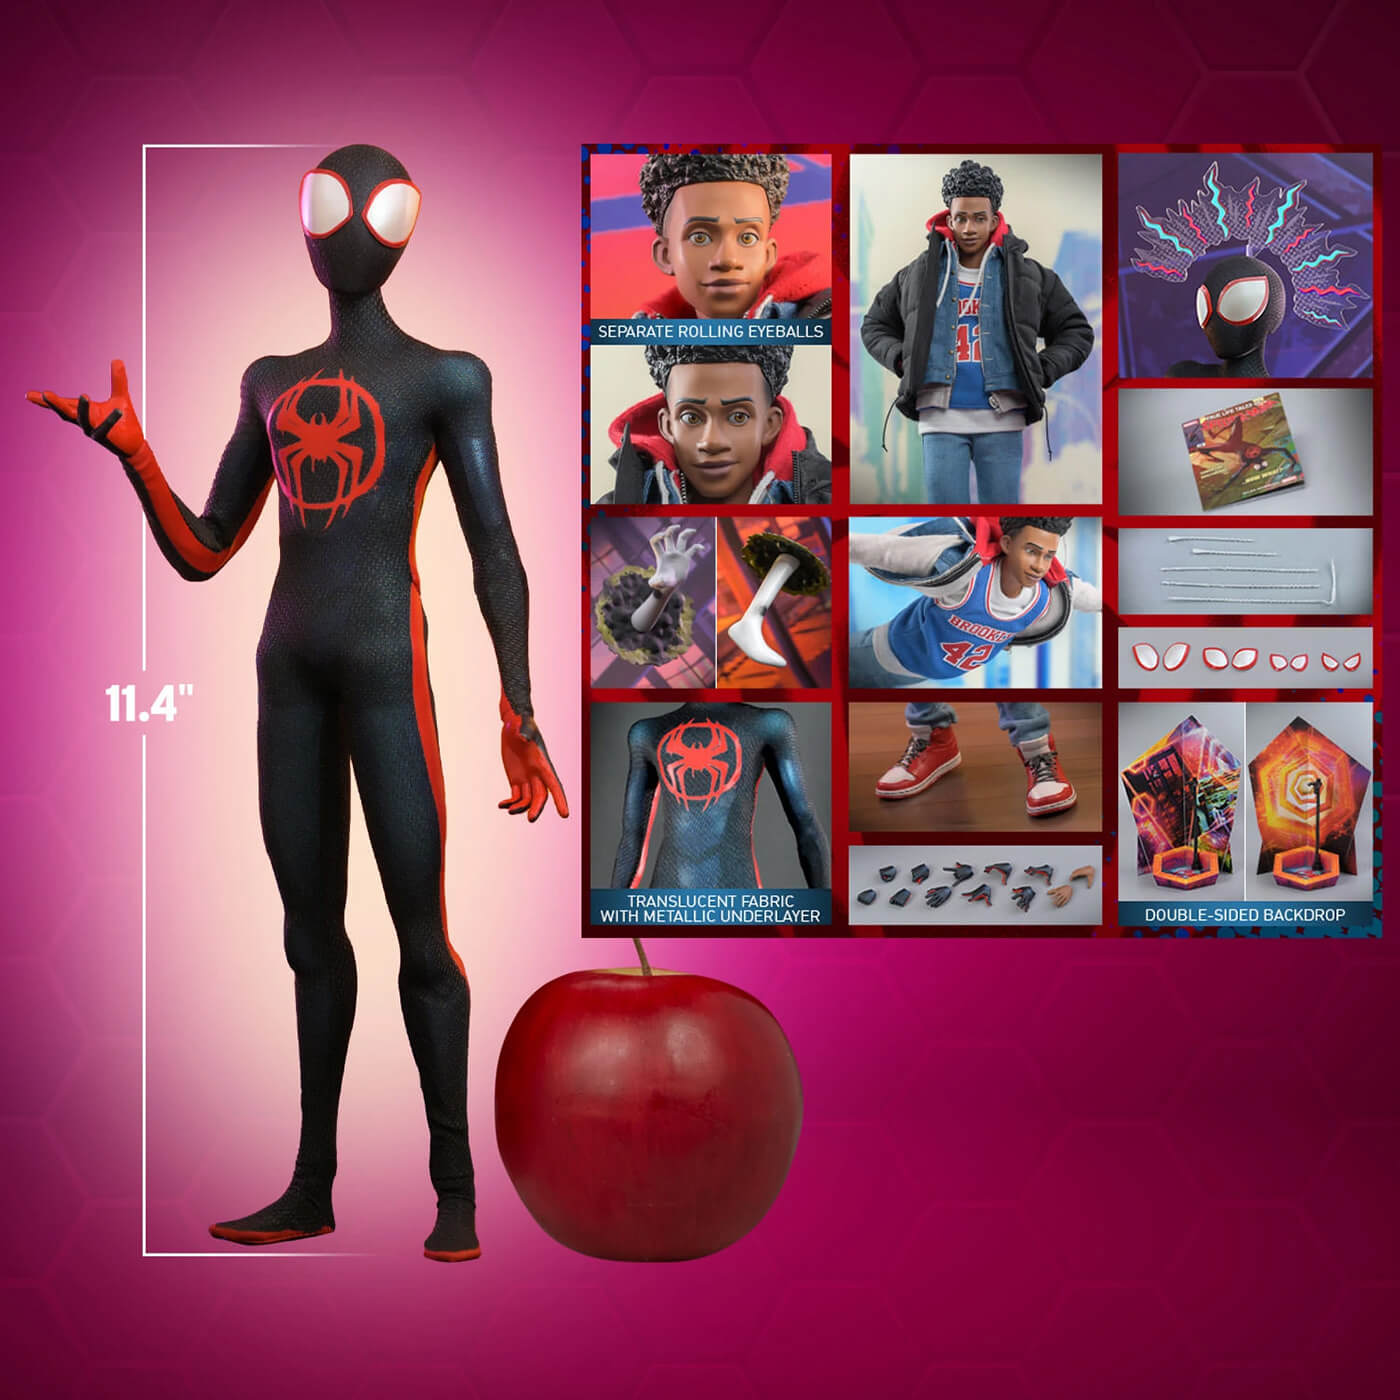 The Miles Morales figure is 11.4 inches tall (or 29cm), which is shown next to an apple to give an idea of height. Accessories and features are also highlighted.